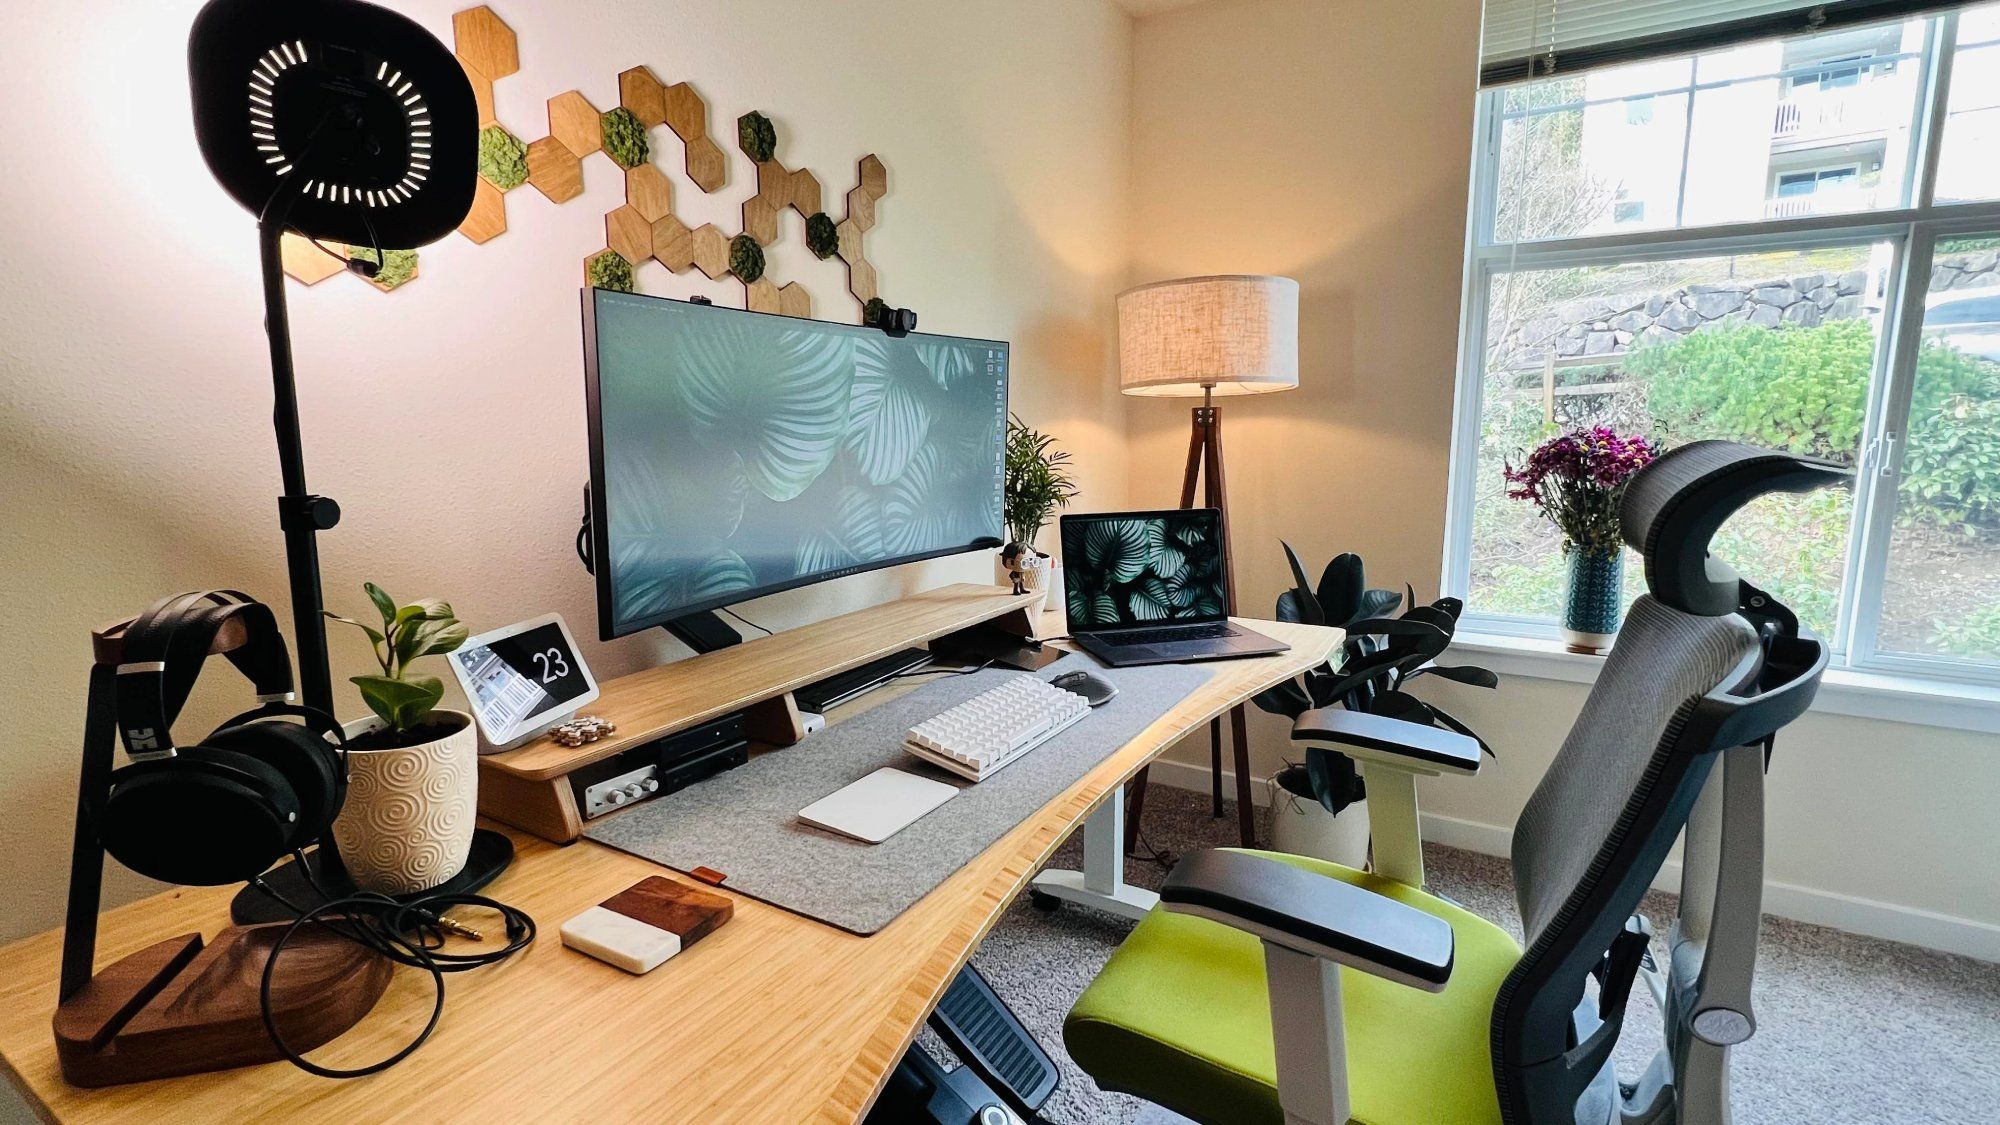 A home office setup featuring a Fully Jarvis bamboo standing desk